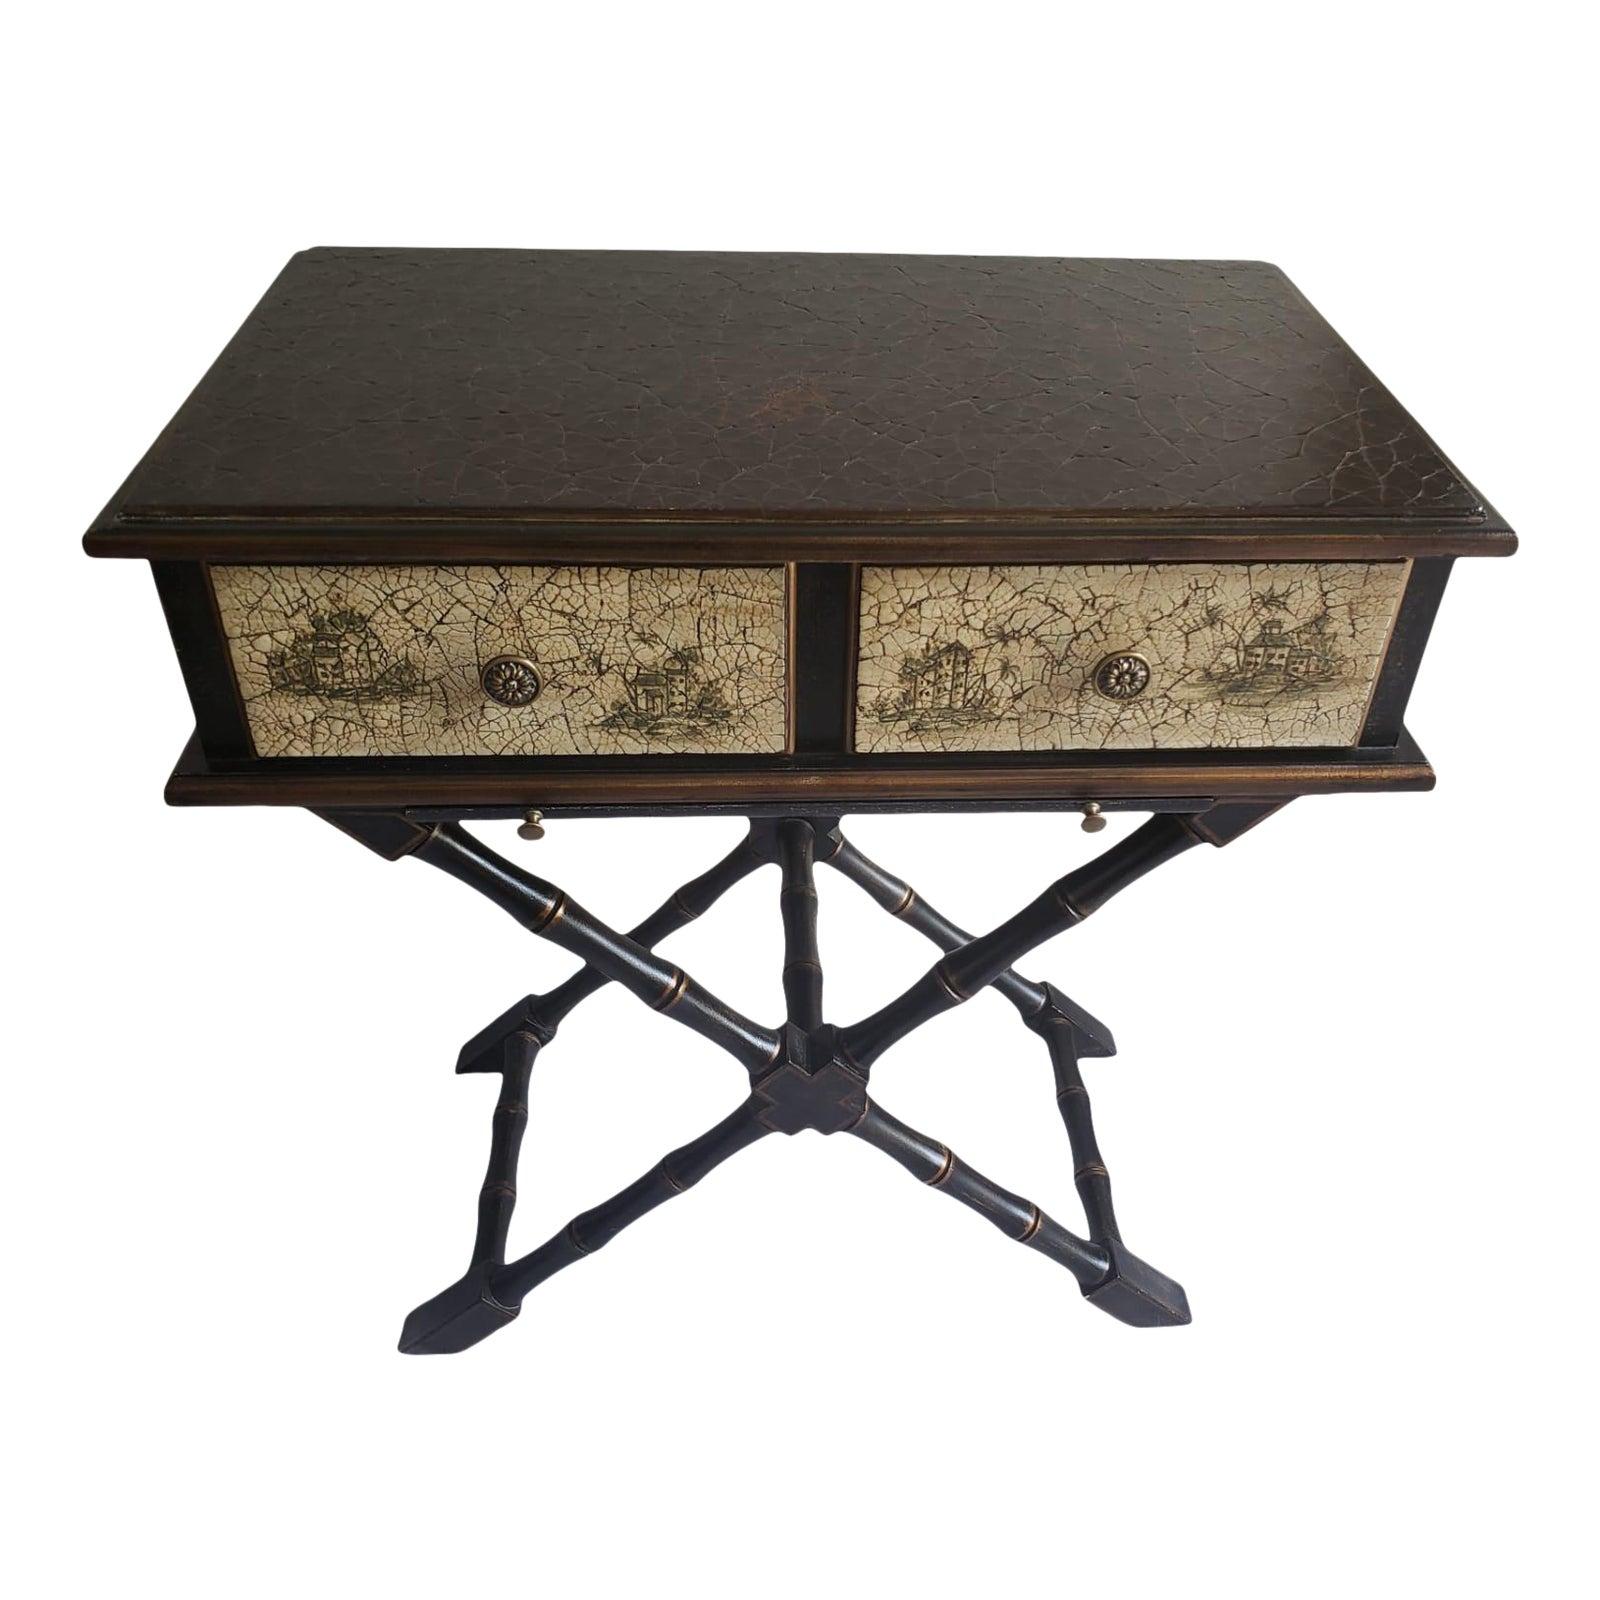 The Bradburn Home Neoclassical StyleTwo-Drawer Faux Bamboo Crossed Leg Table